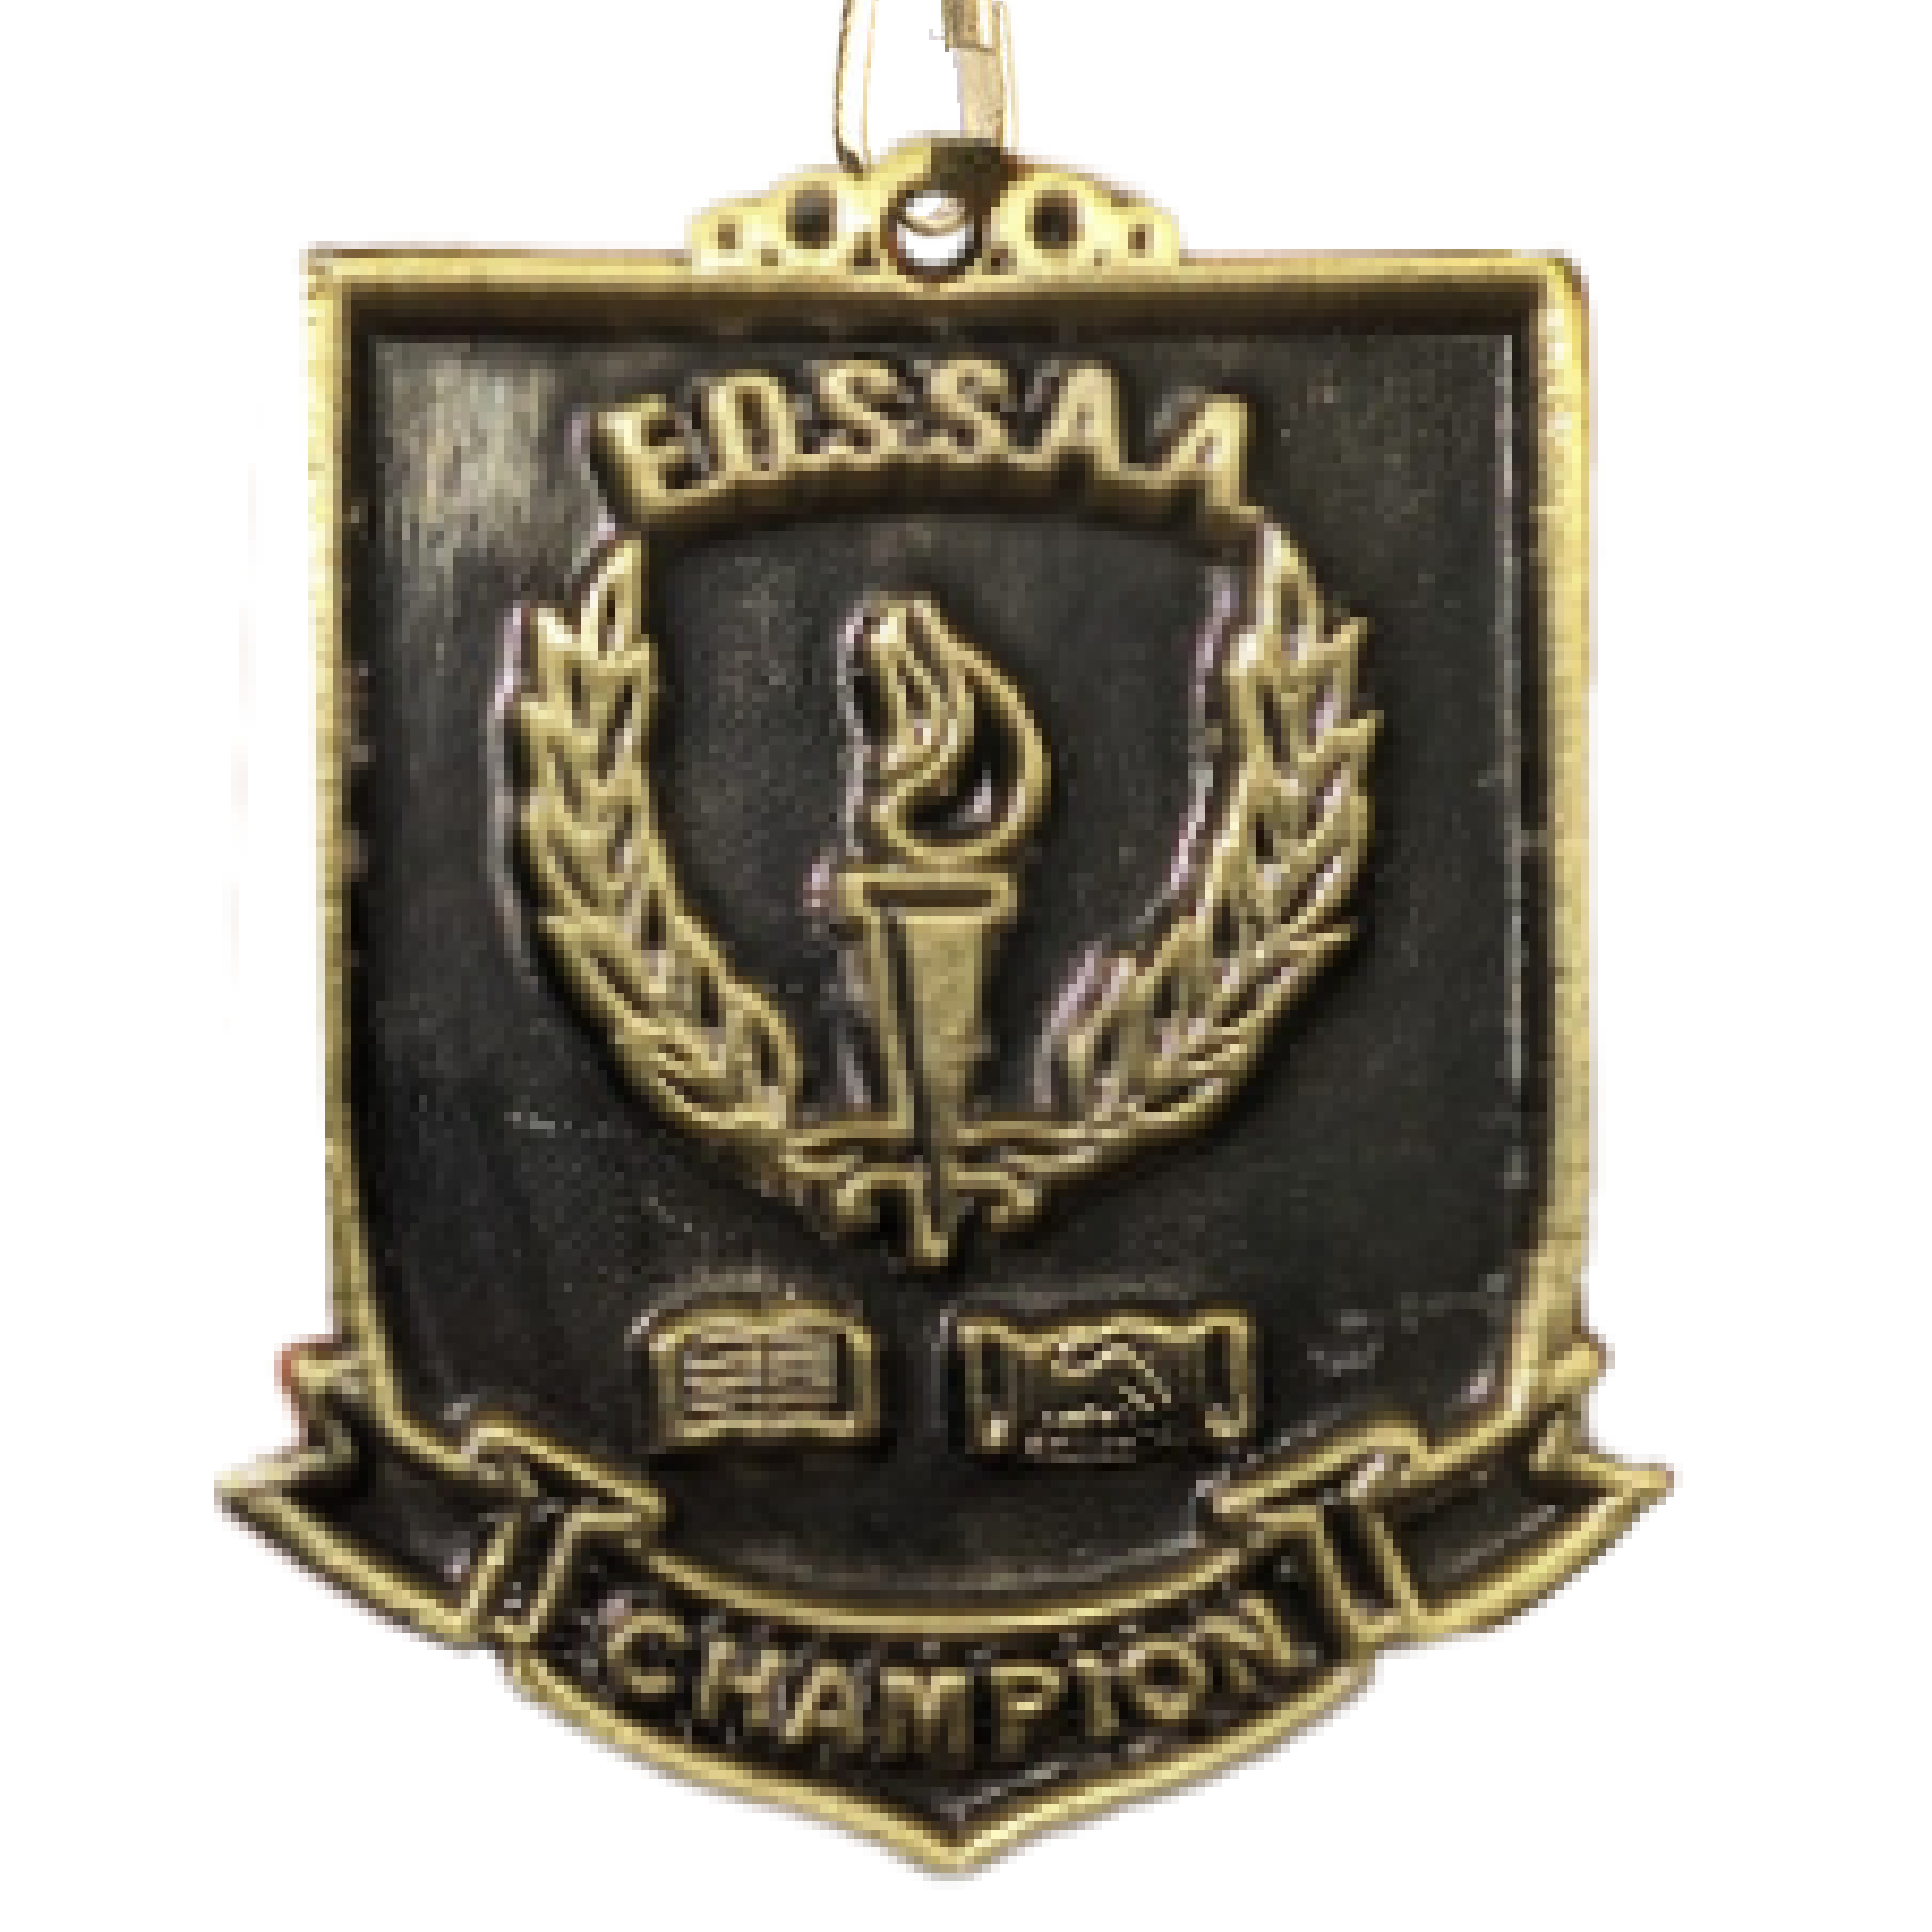 EOSSAA - Customized Medals with Neck Ribbons